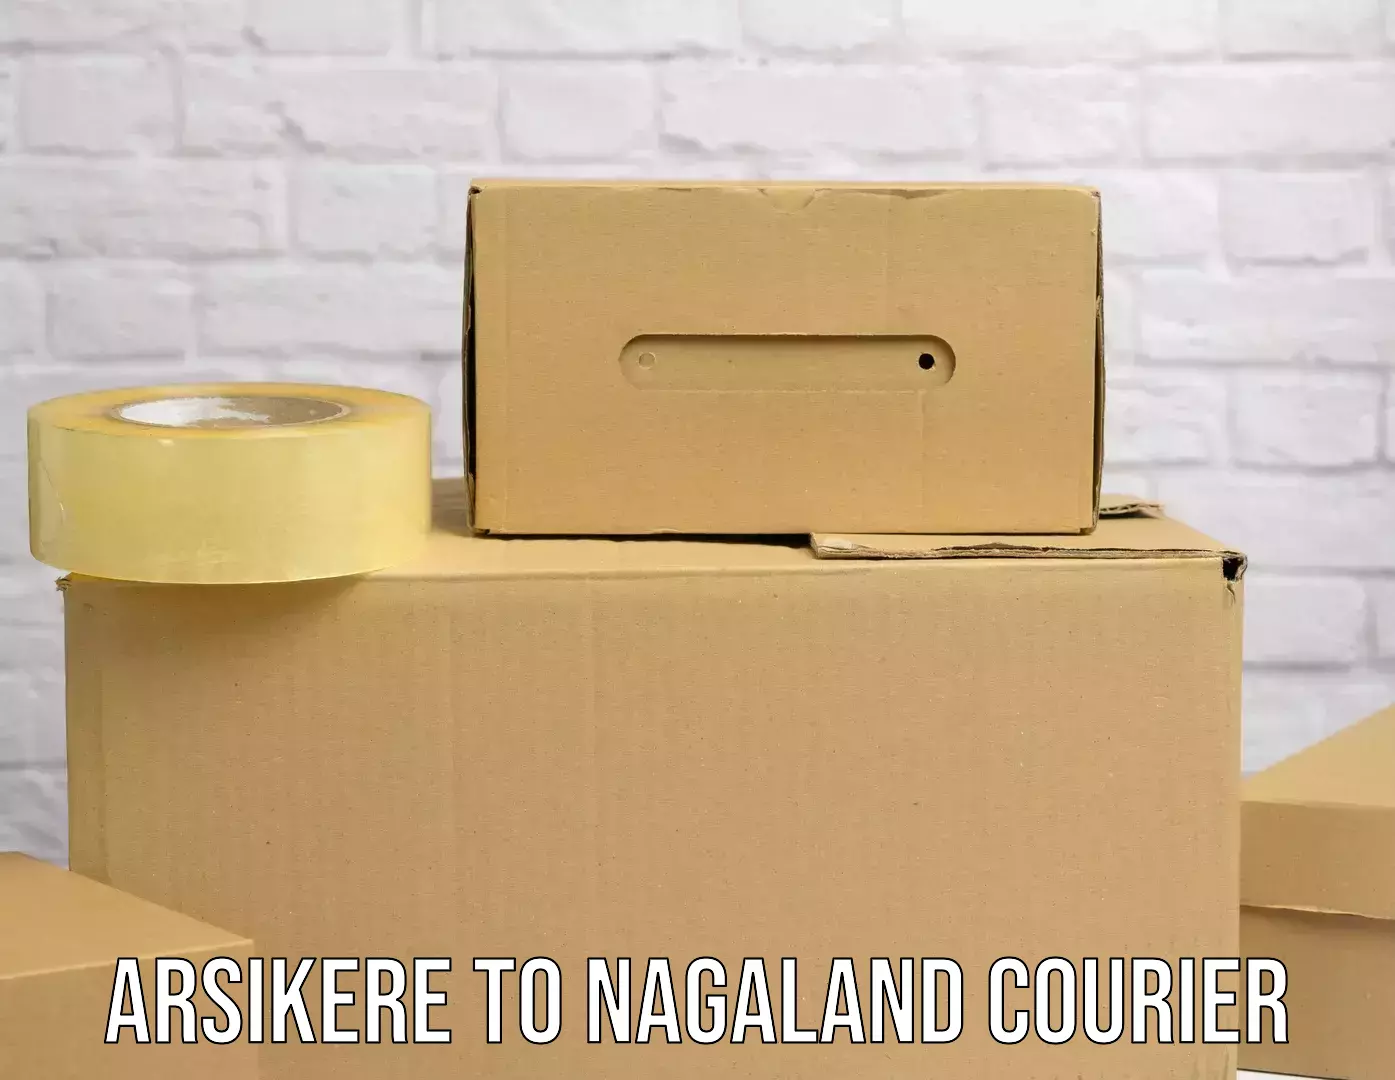 Urban courier service Arsikere to Nagaland